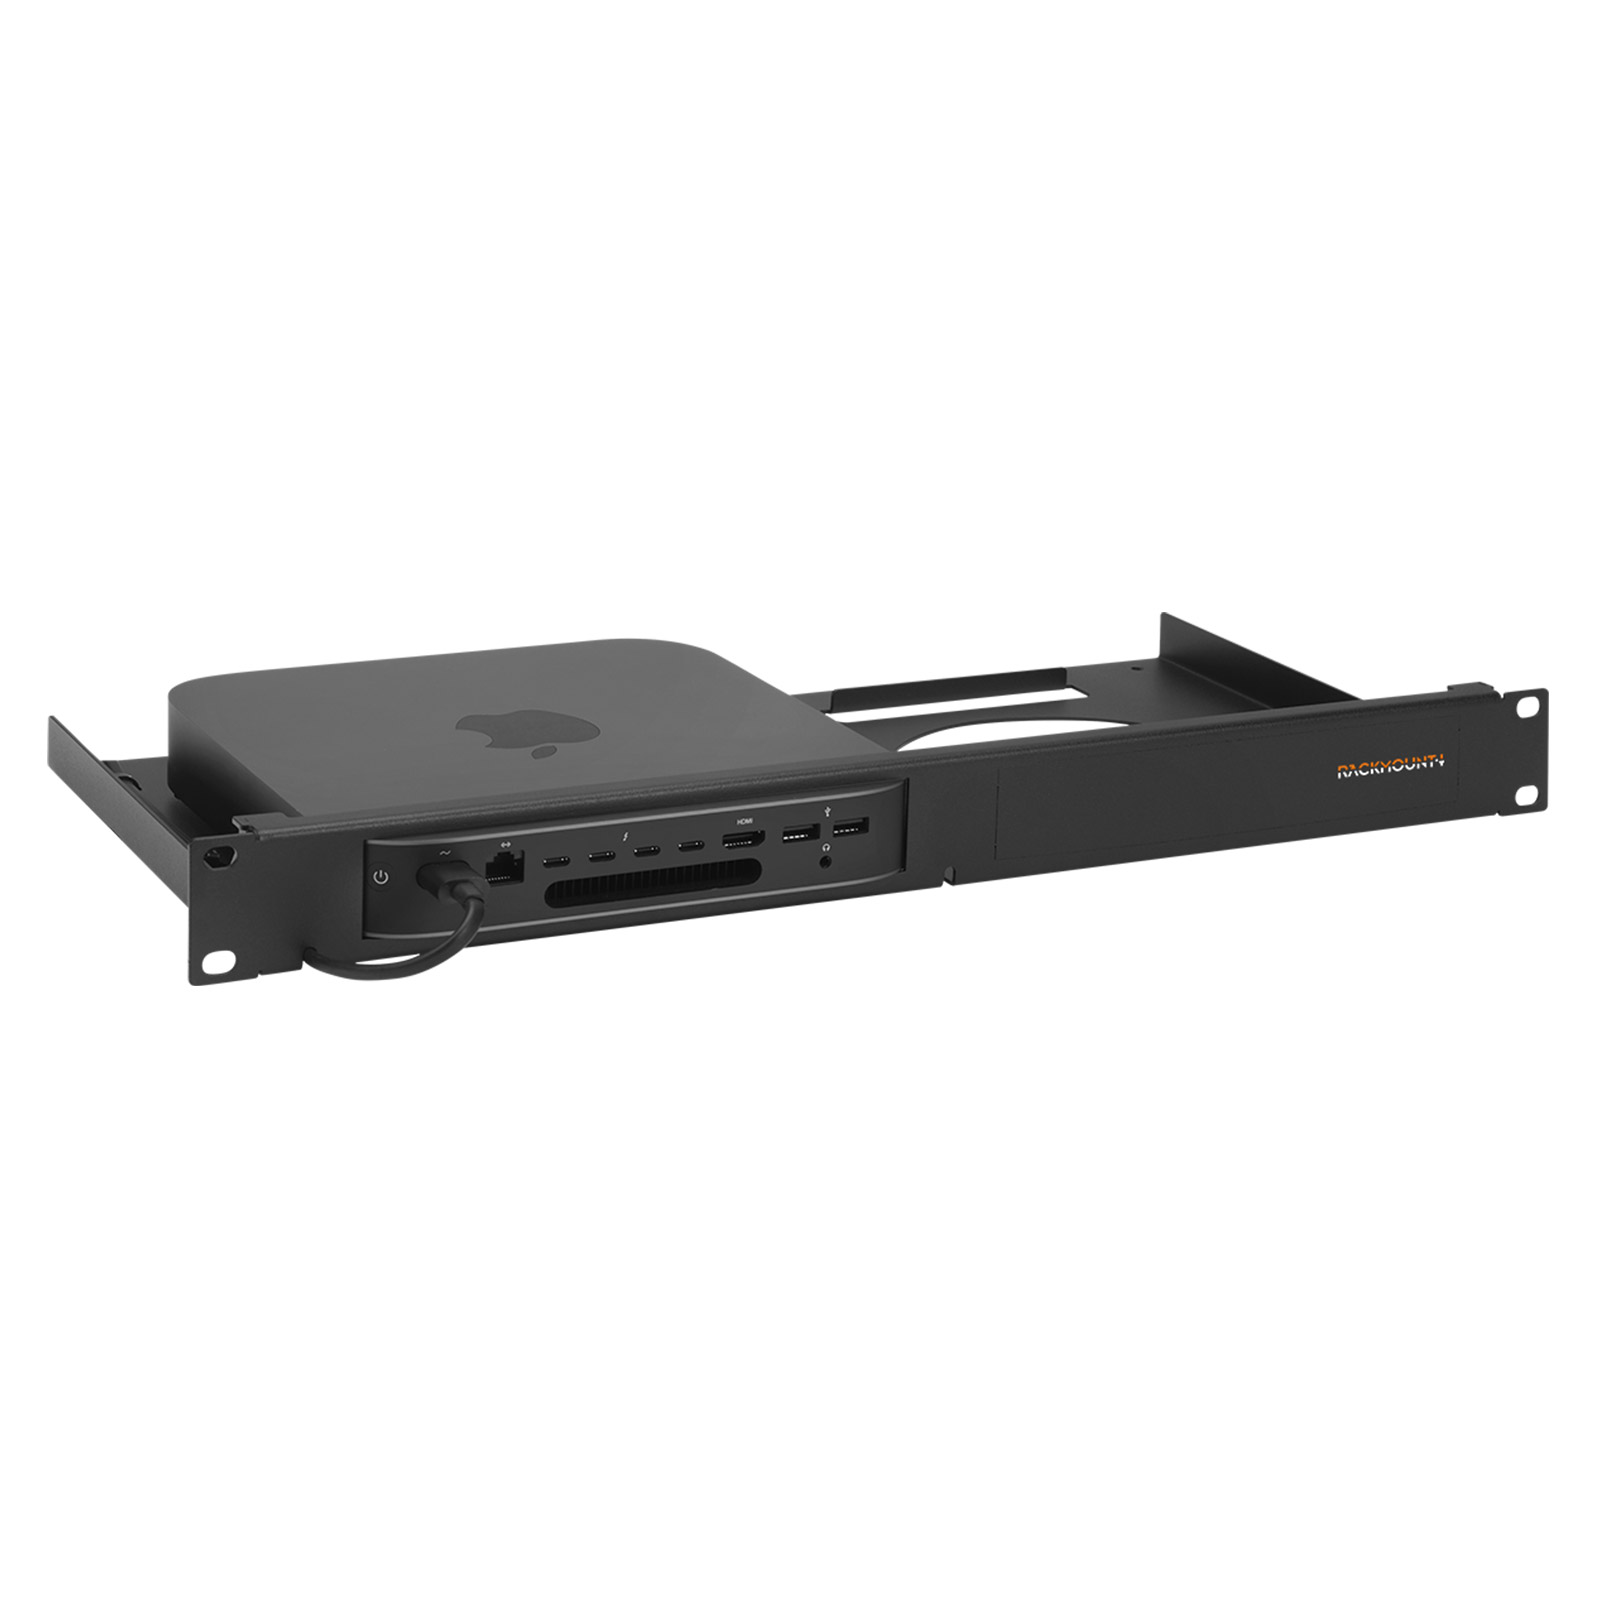 https://www.allfirewalls.de/out/pictures/master/product/1/2cd2137b7598f24d4ae45e5bc5f82a36afa43a48_rackmount_apple_mini_t1_frontleft.jpg